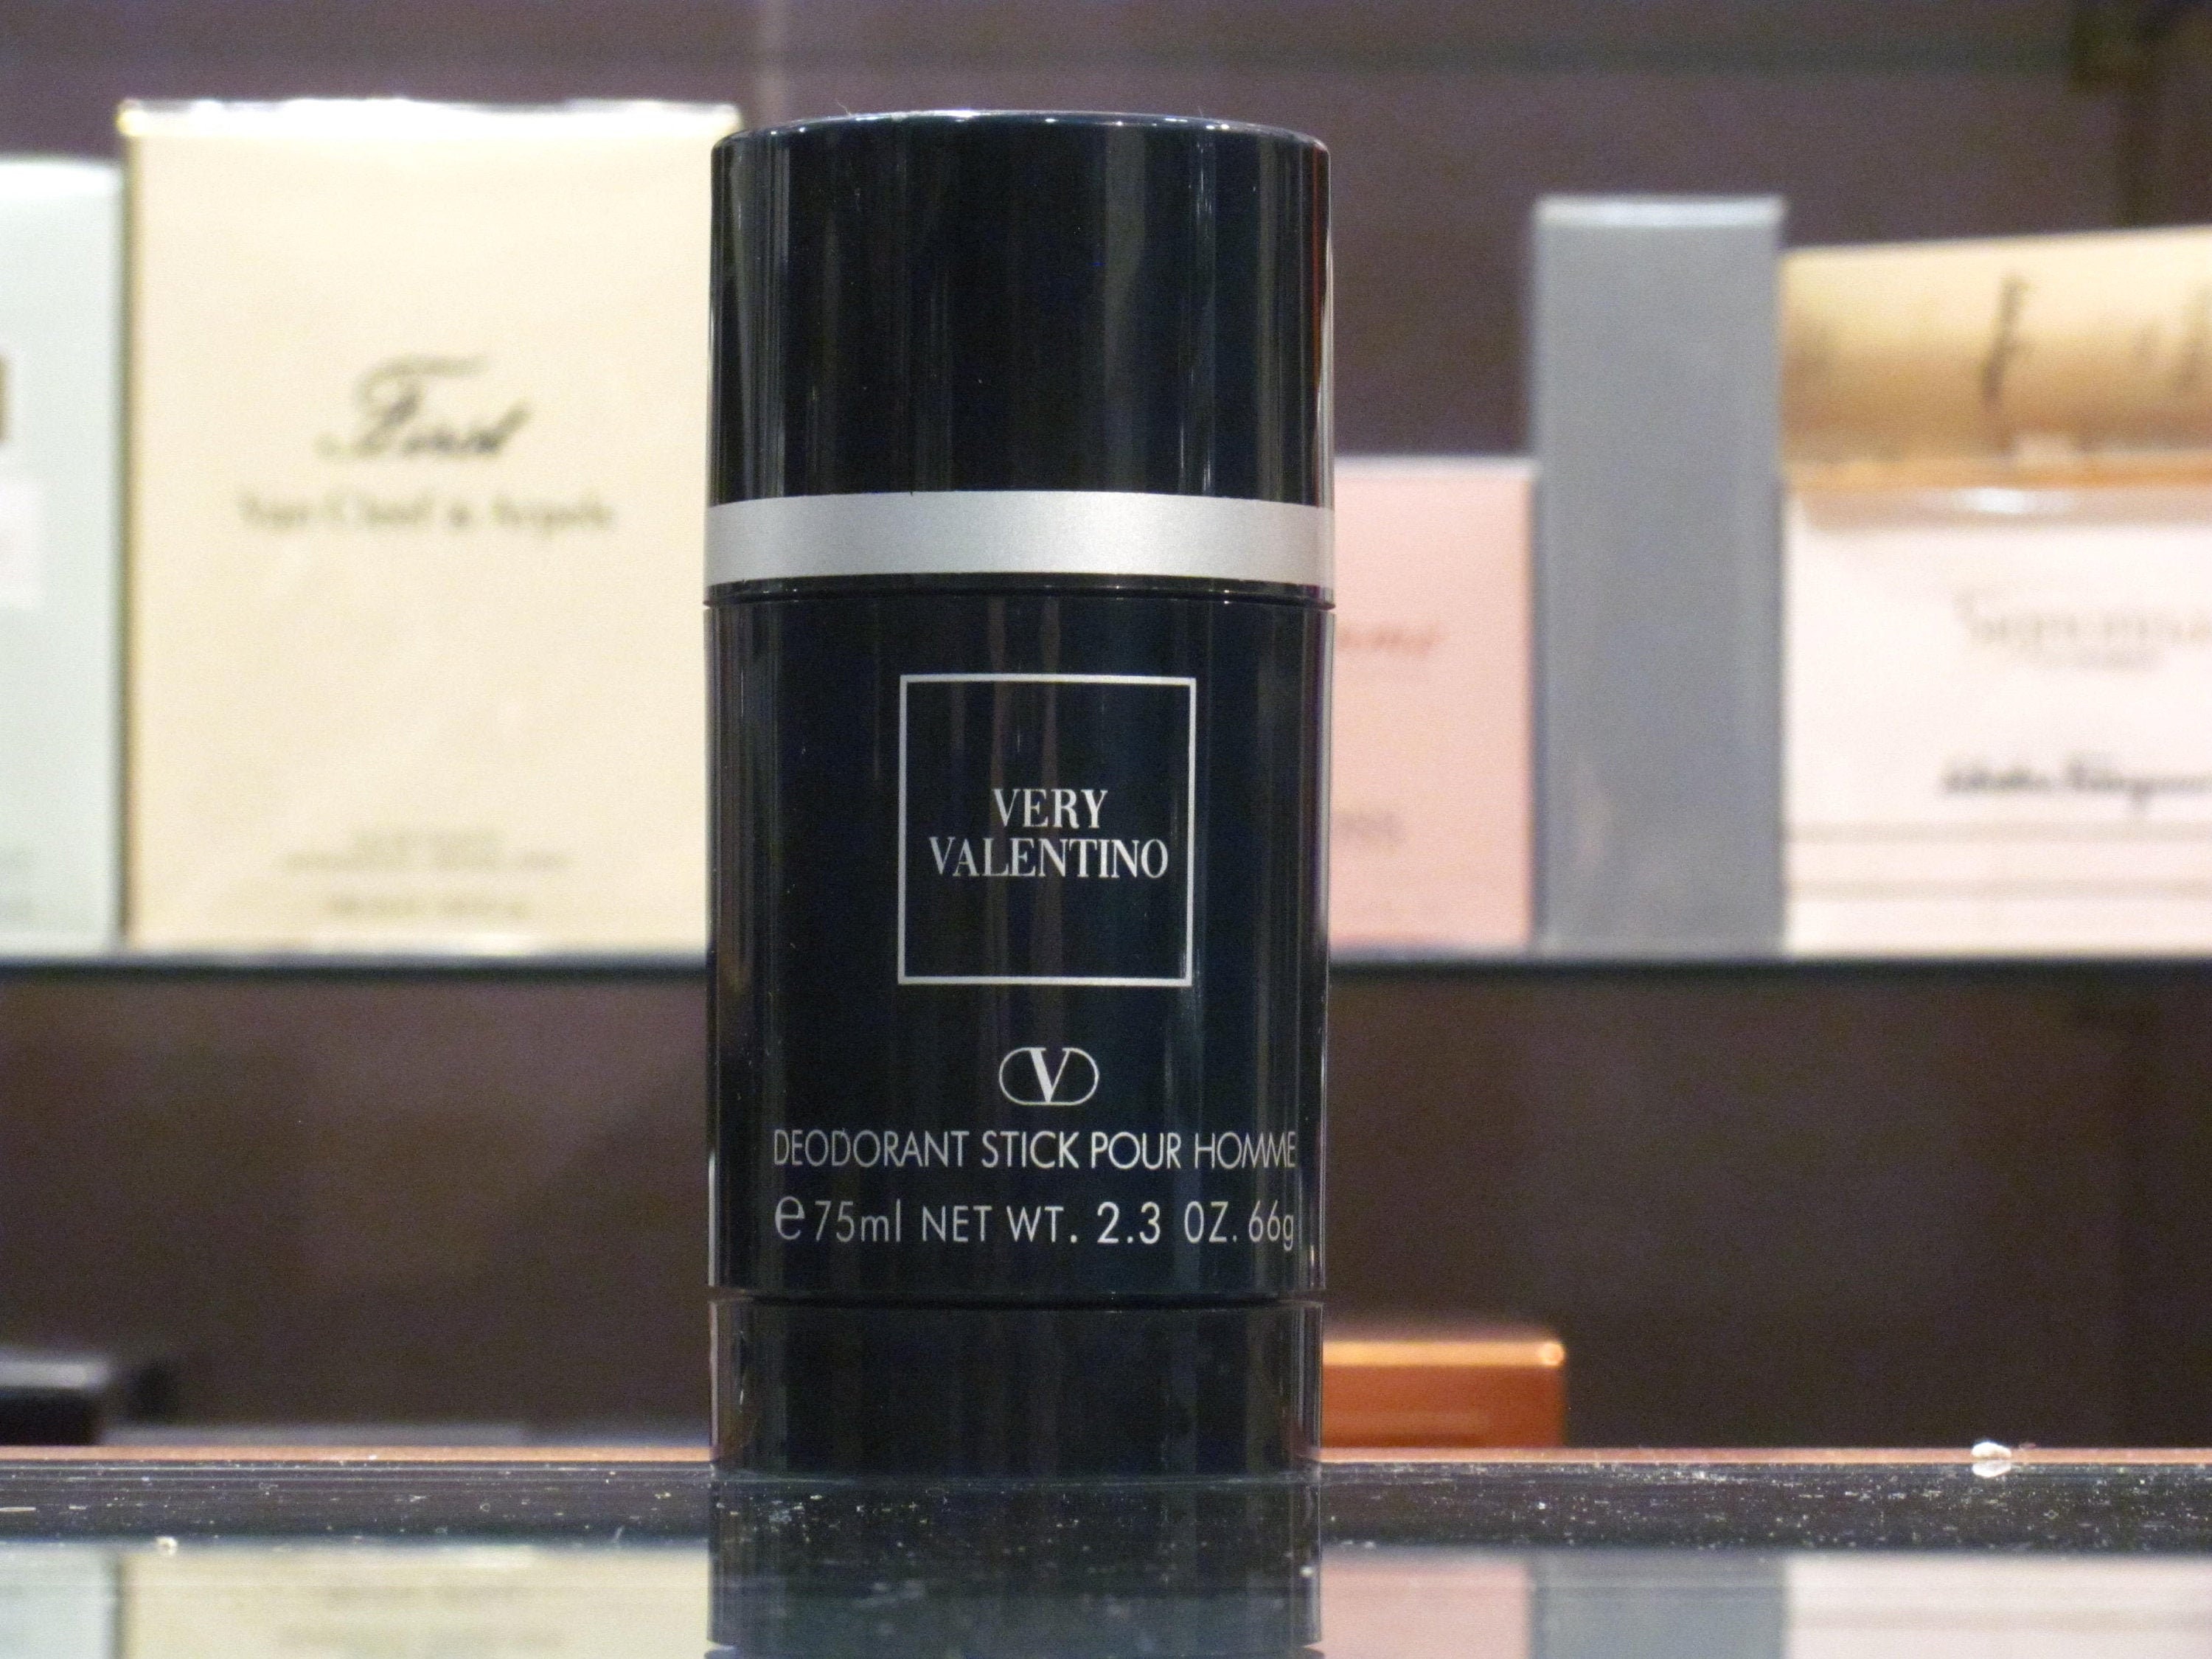 Minearbejder ubrugt dok Very Valentino Pour Homme Valentino Deodorant Stick 75ml - Etsy Israel